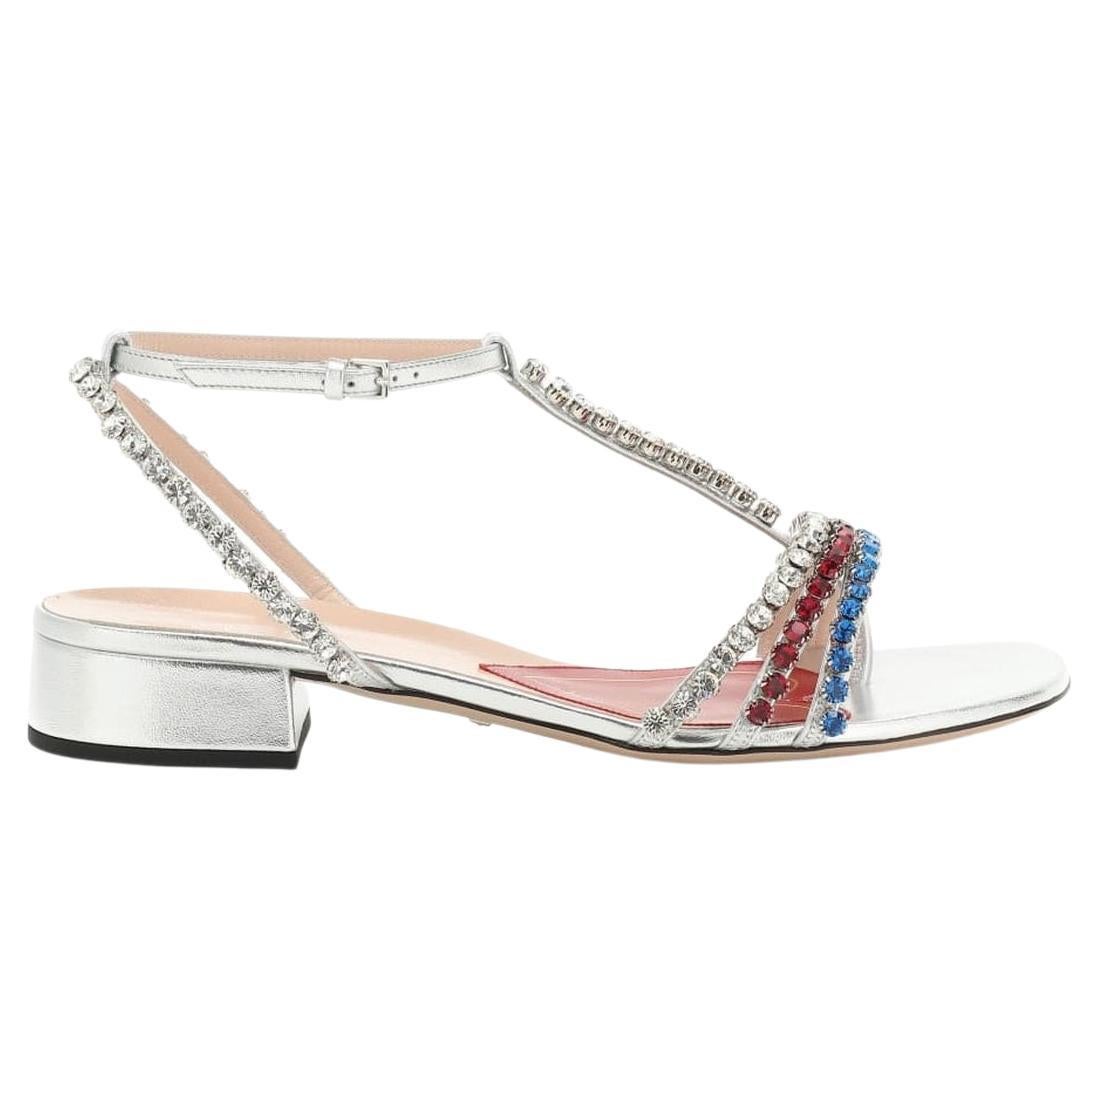 Gucci Bertie Embellished Metallic Leather Sandals IT 37 For Sale